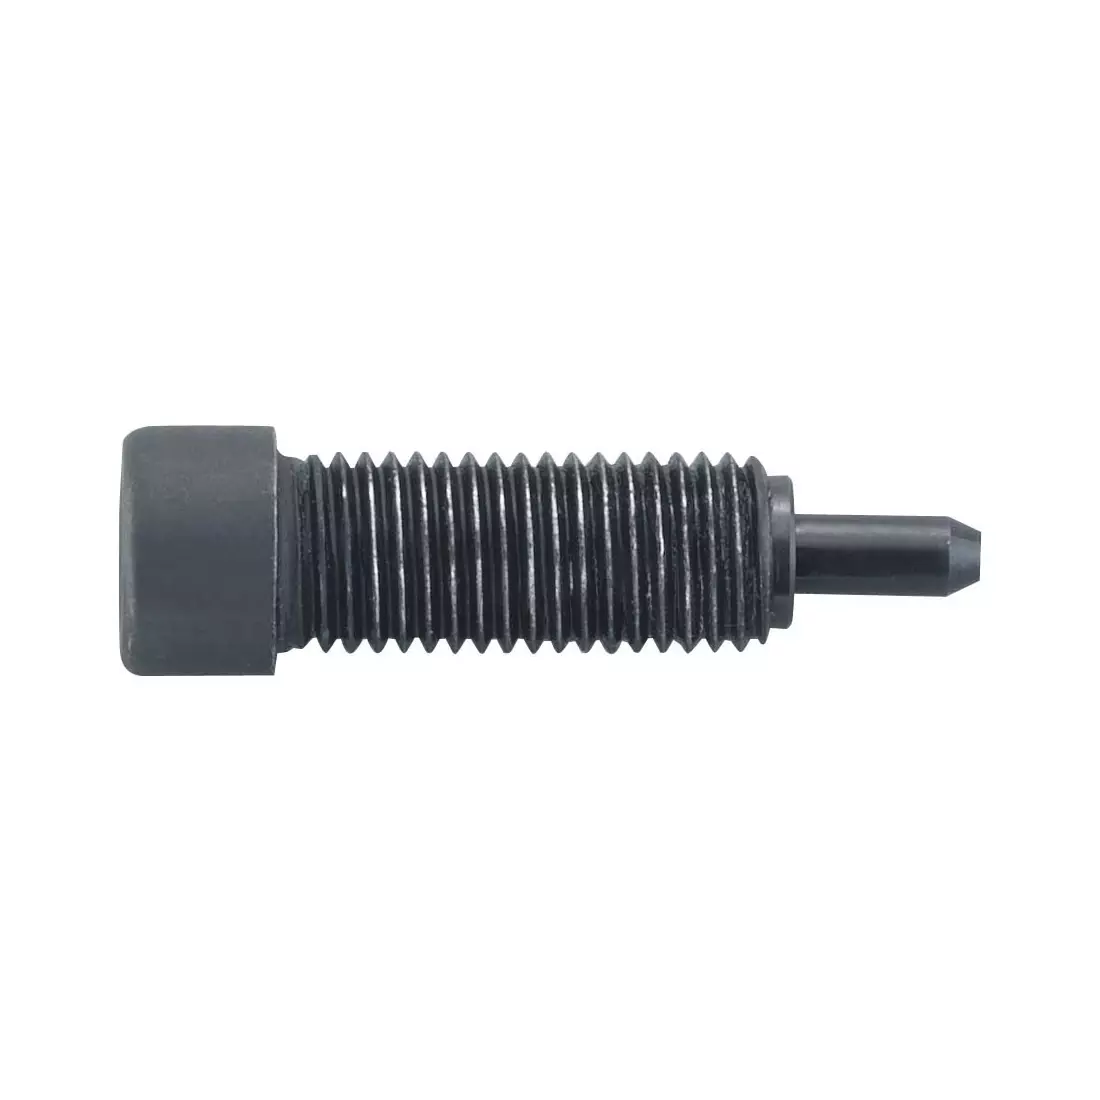 TOPEAK REPLACEMENT PLUNGER PIN FOR THE CHAIN BREAKER 5 mm ( for Alien, Auper chain tool toolkits) T-T1300-A